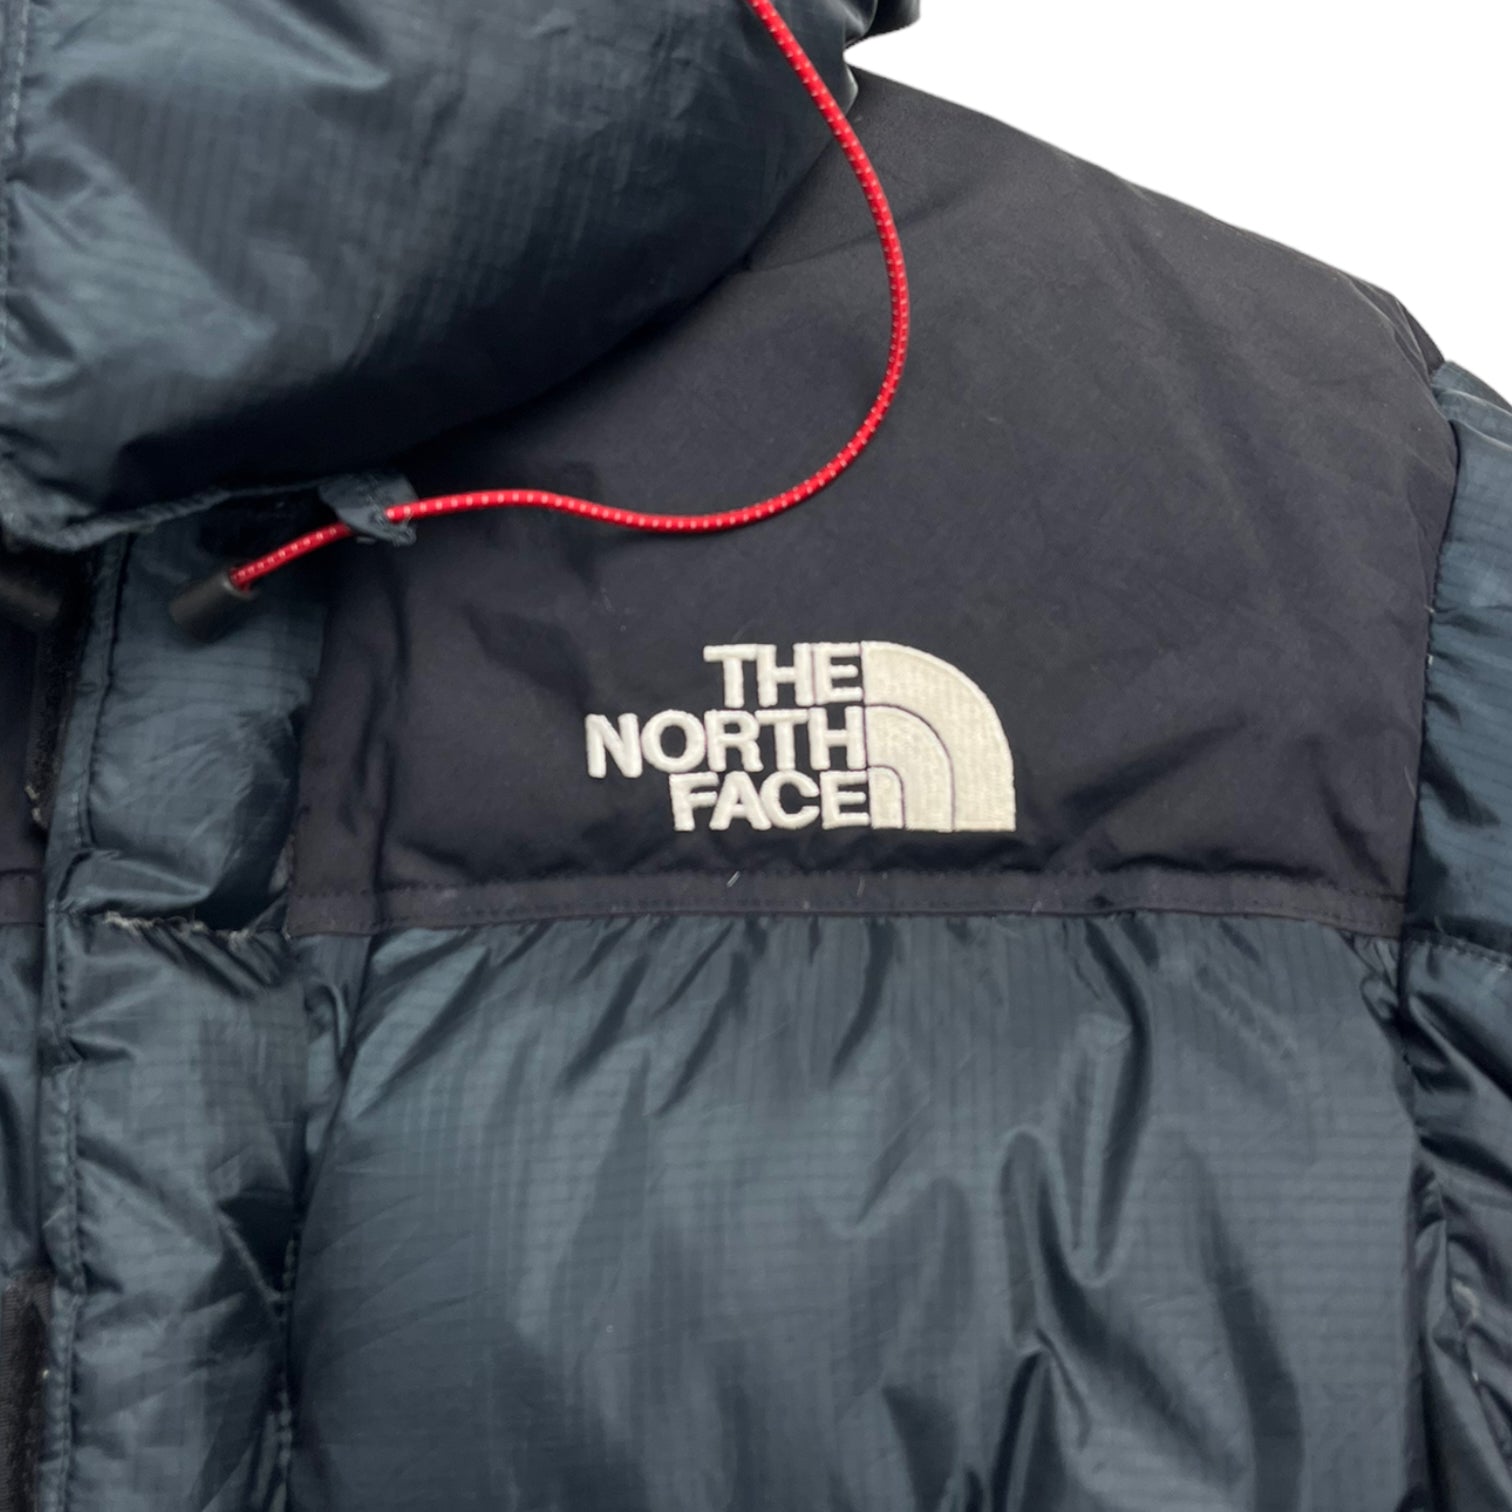 The North Face Hooded 700 Summit Series Puffer Jacket